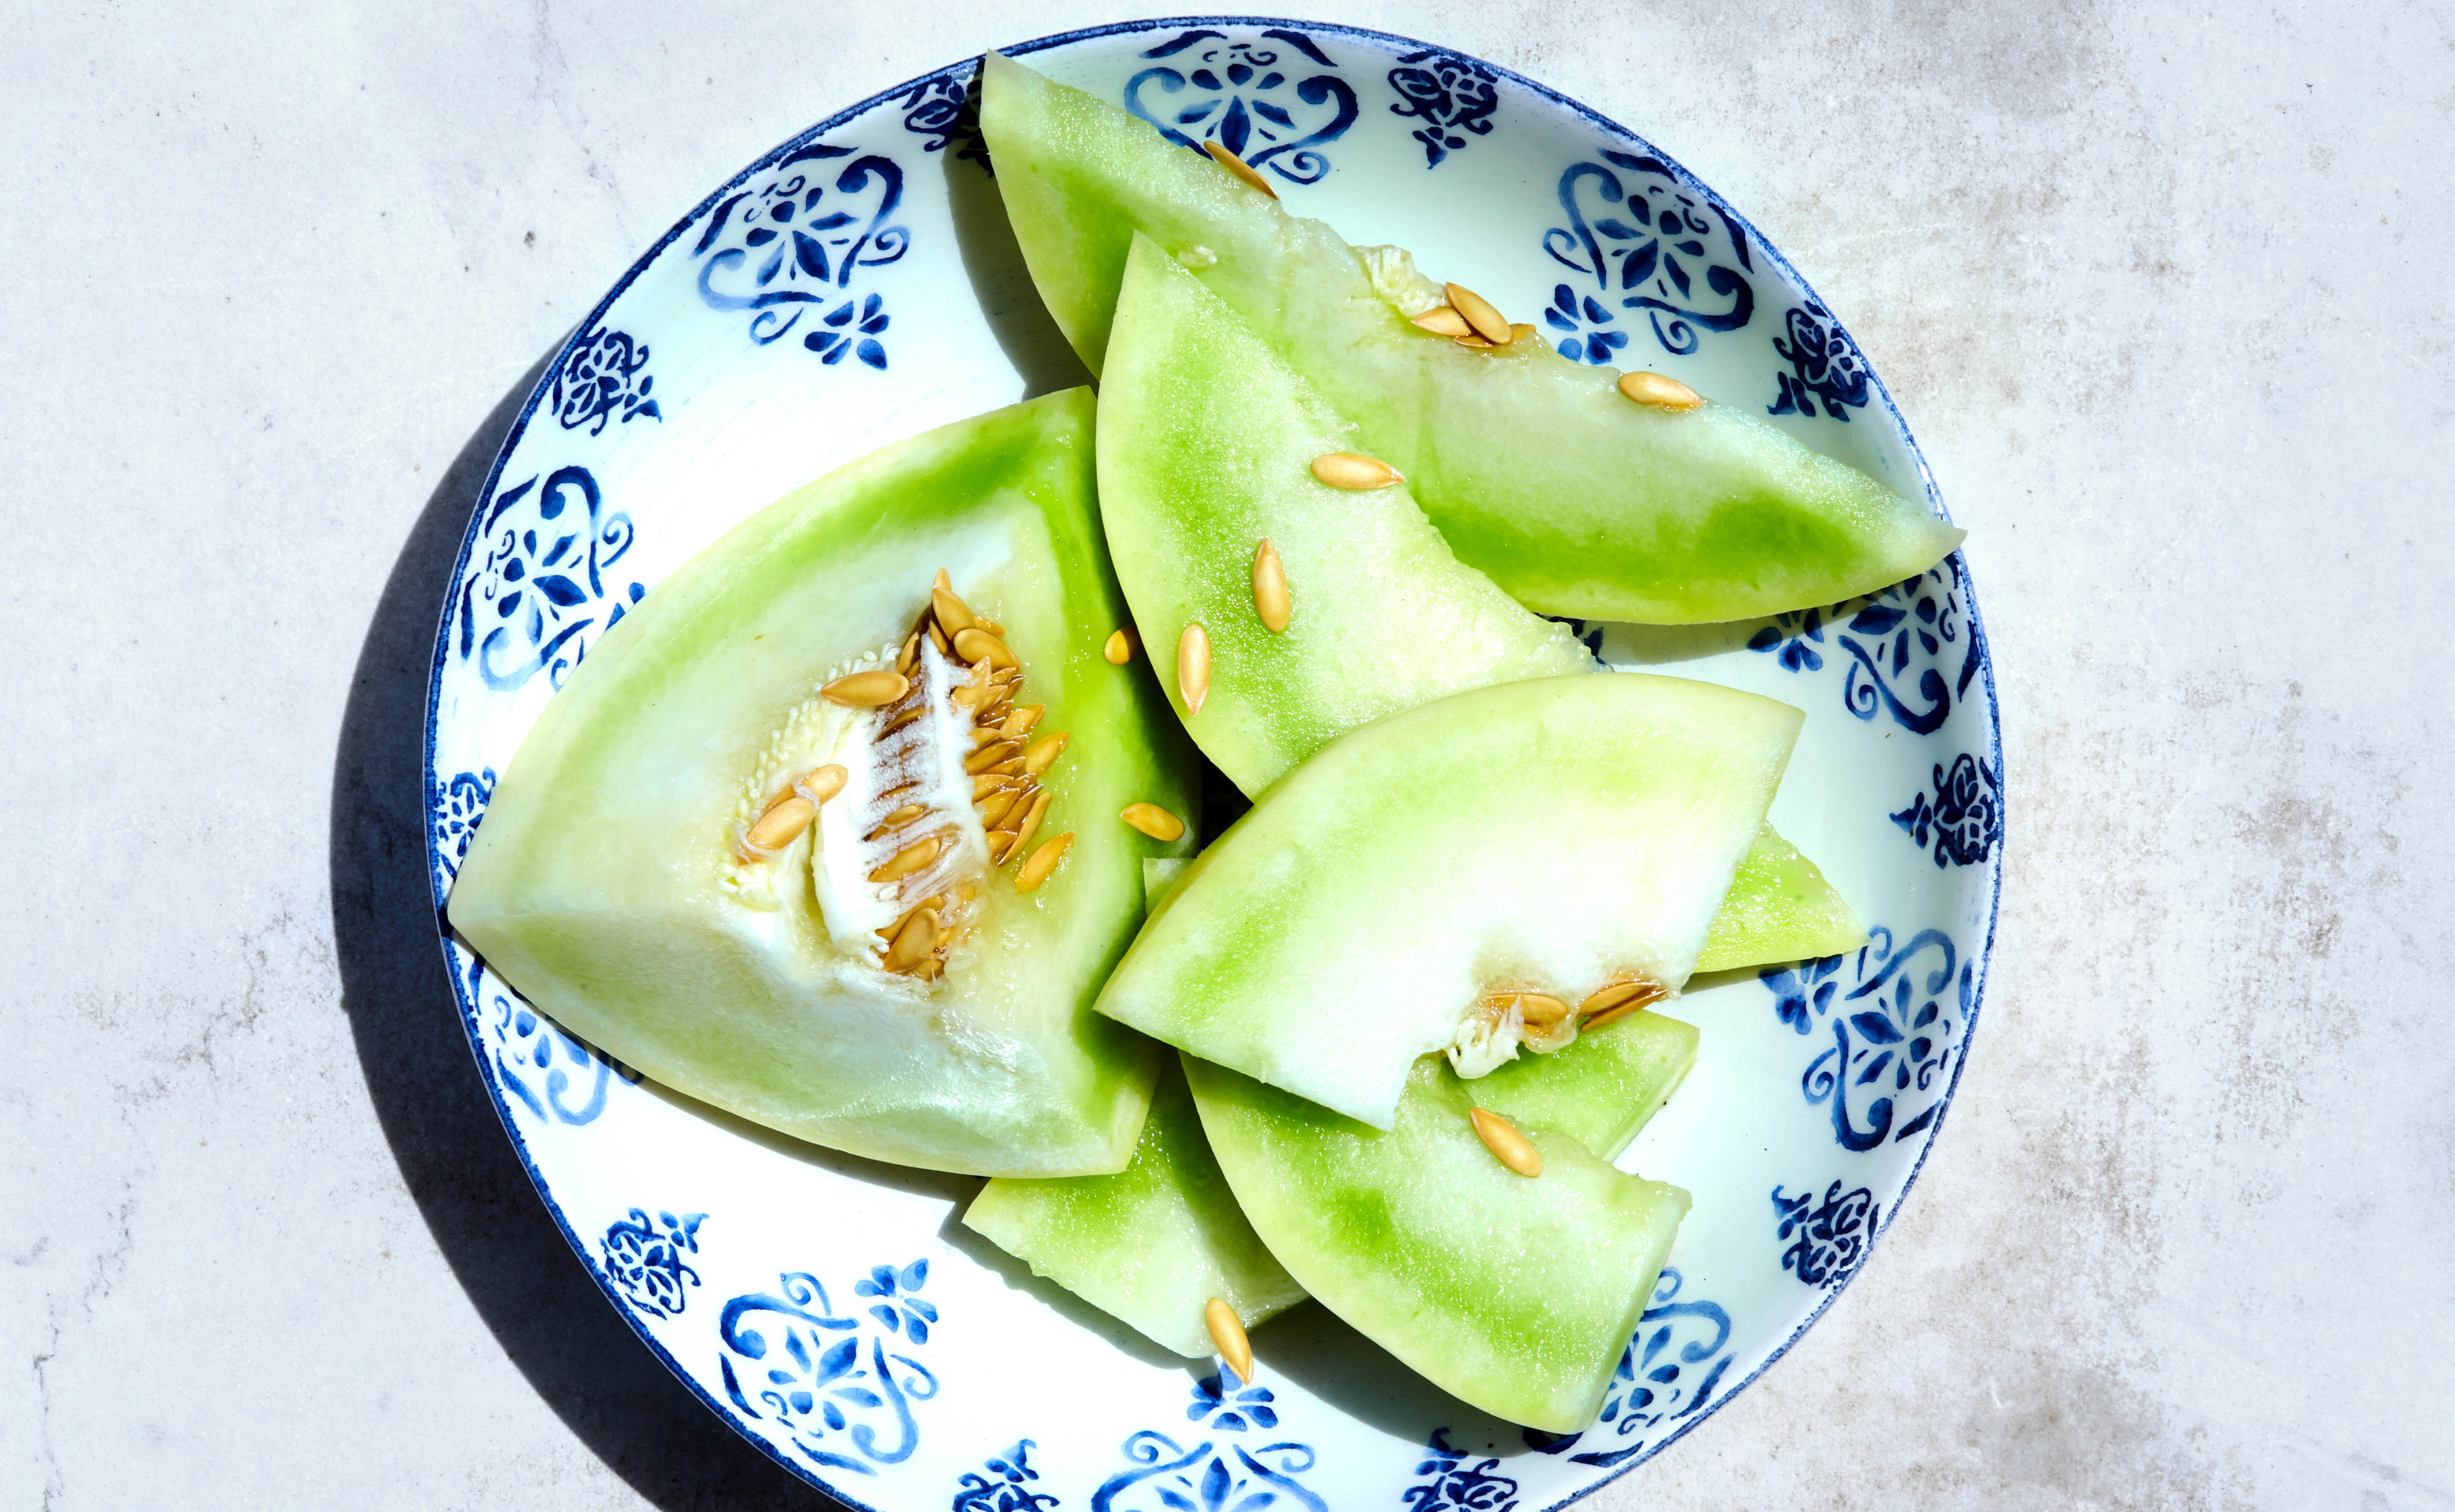 How to pick a juicy sweet tasty honeydew melon, The 4 things to look for